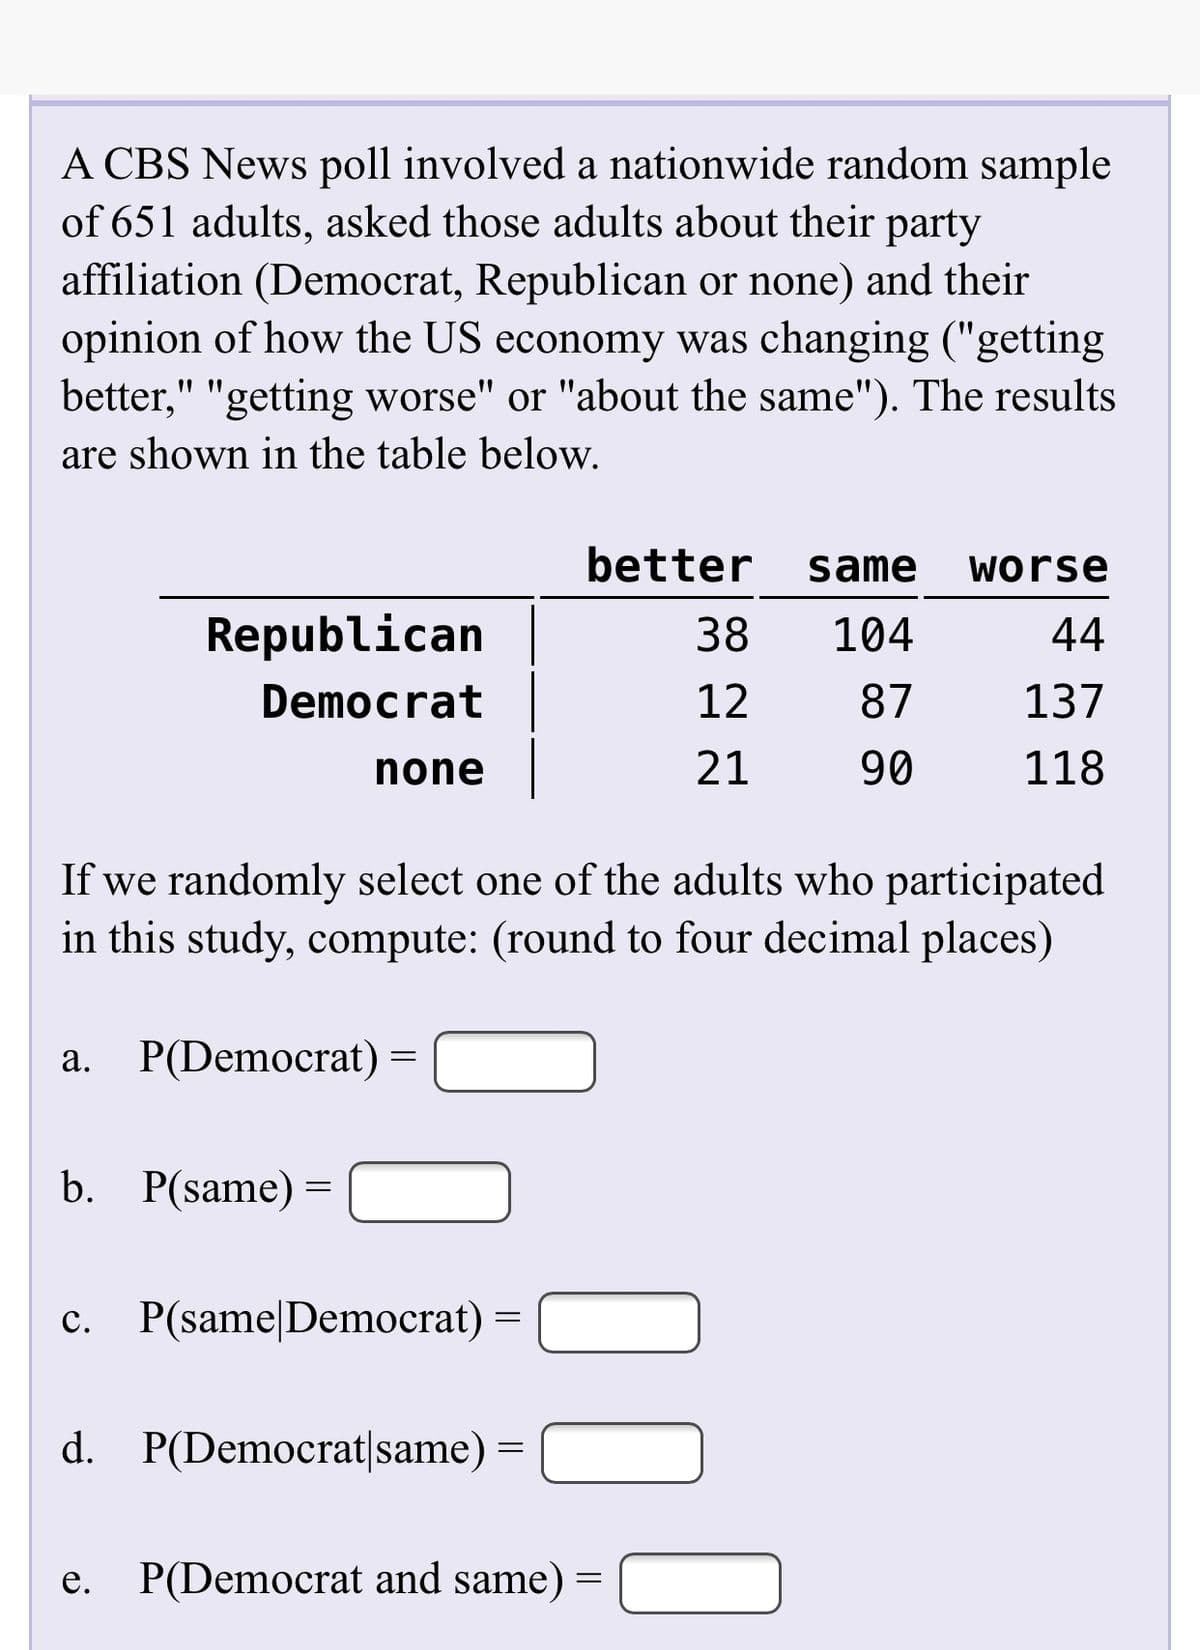 A CBS News poll involved a nationwide random sample
of 651 adults, asked those adults about their party
affiliation (Democrat, Republican or none) and their
opinion of how the US economy was changing ("getting
better," "getting worse" or "about the same"). The results
are shown in the table below.
better
same
worse
Republican
38
104
44
Democrat
12
87
137
none
21
90
118
If we randomly select one of the adults who participated
in this study, compute: (round to four decimal places)
а.
P(Democrat) =
b. P(same)
с.
P(same|Democrat) =
d. P(Democrat|same) =
е.
P(Democrat and same)
